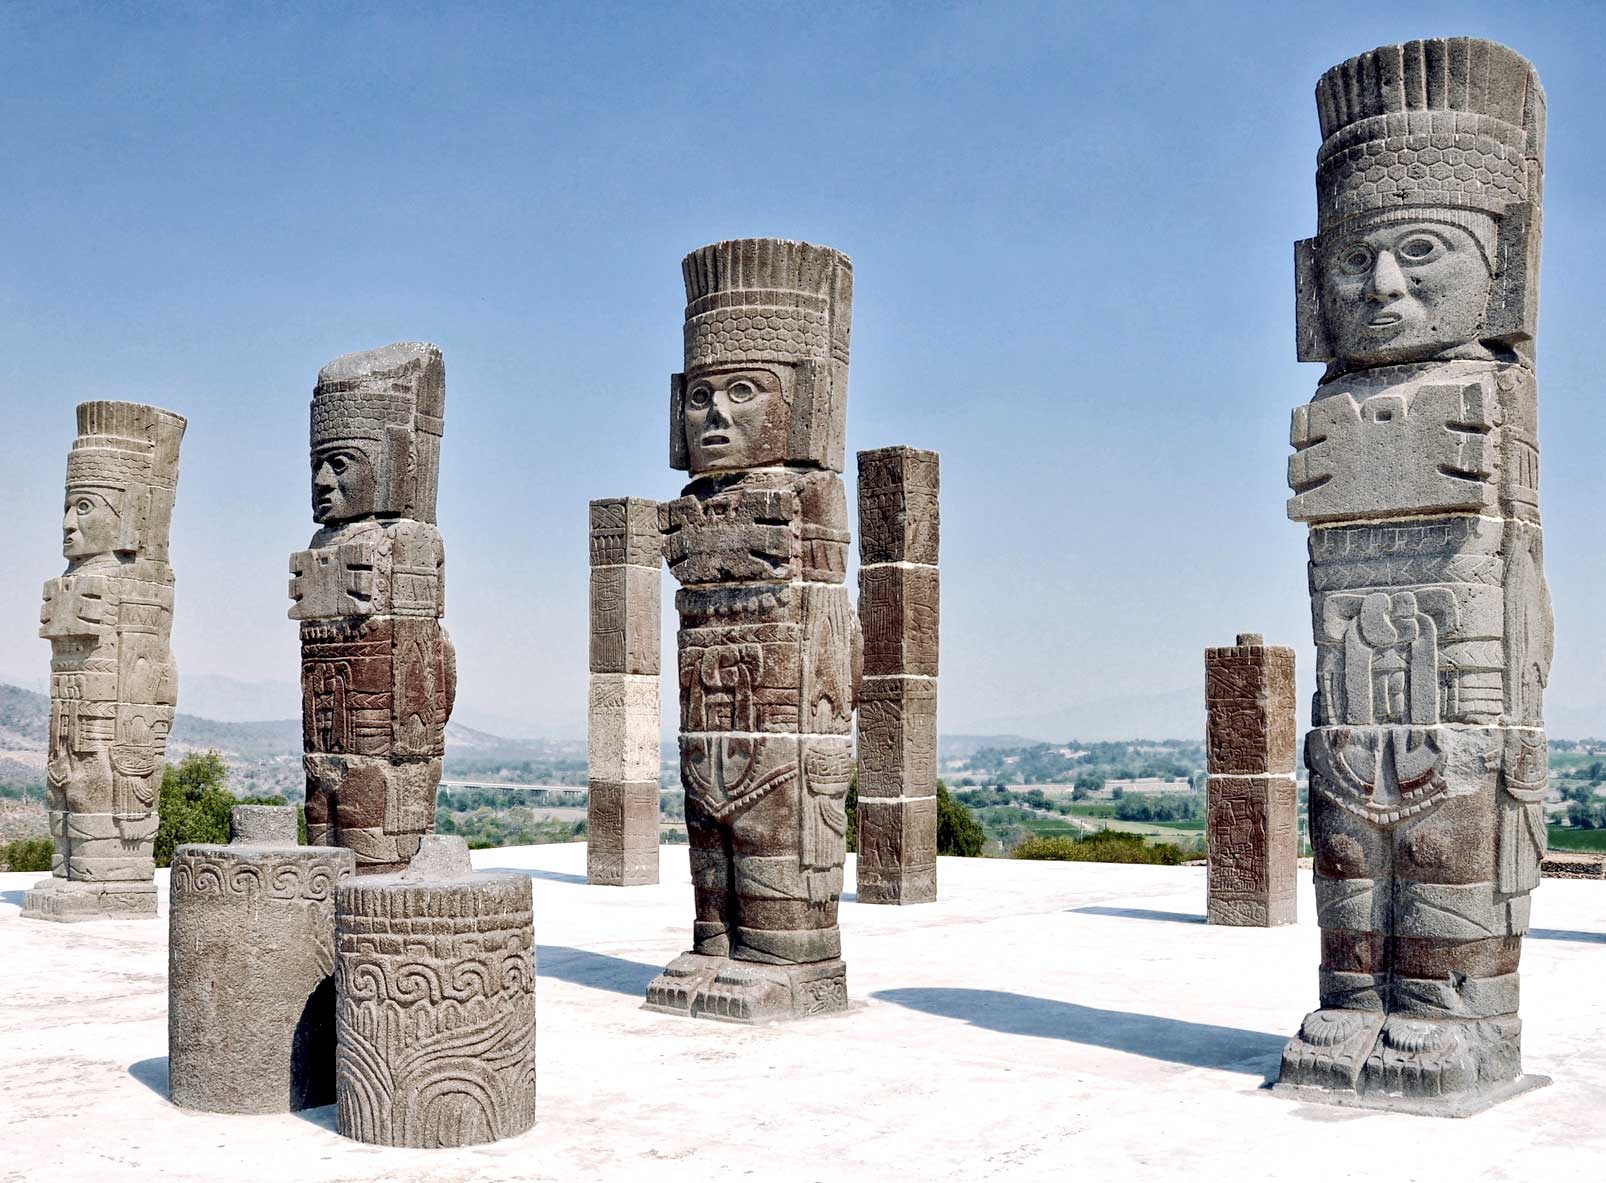 7 Day Mexico City Multi-Day Tour | Group Discount Rate $1855.00 US dollars per person